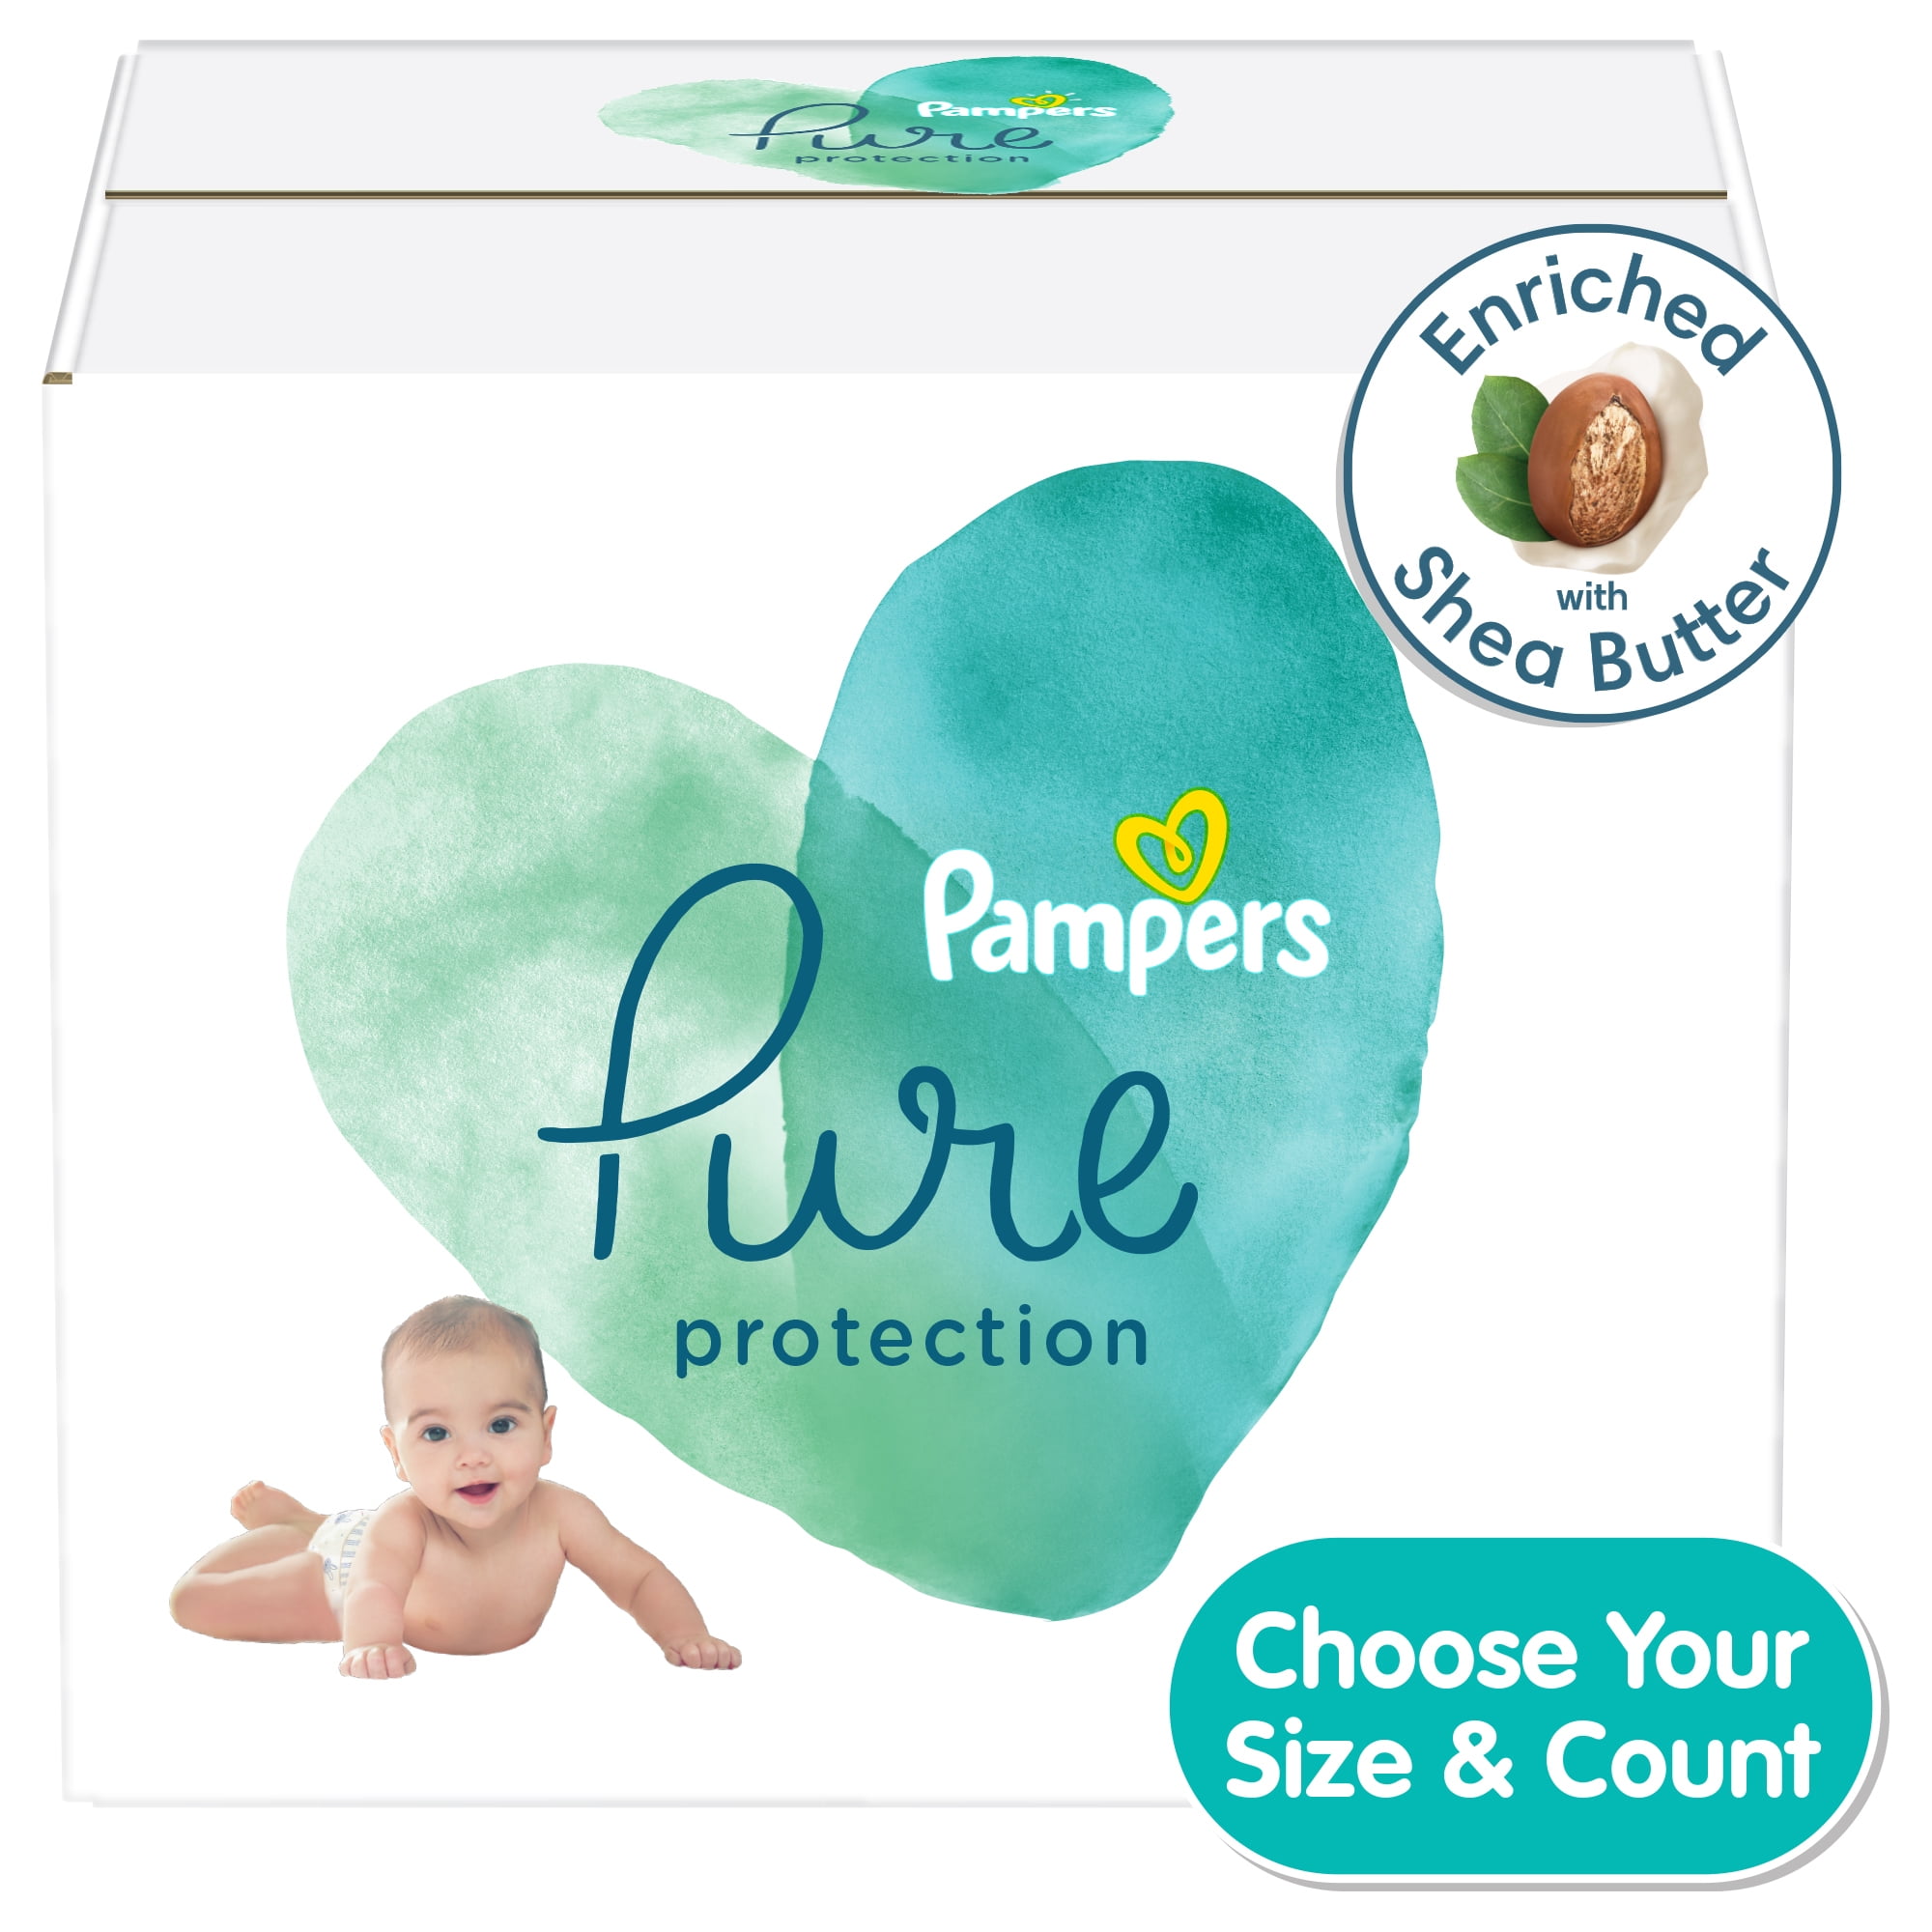 Pampers Procare - Couches taille 0 - 76